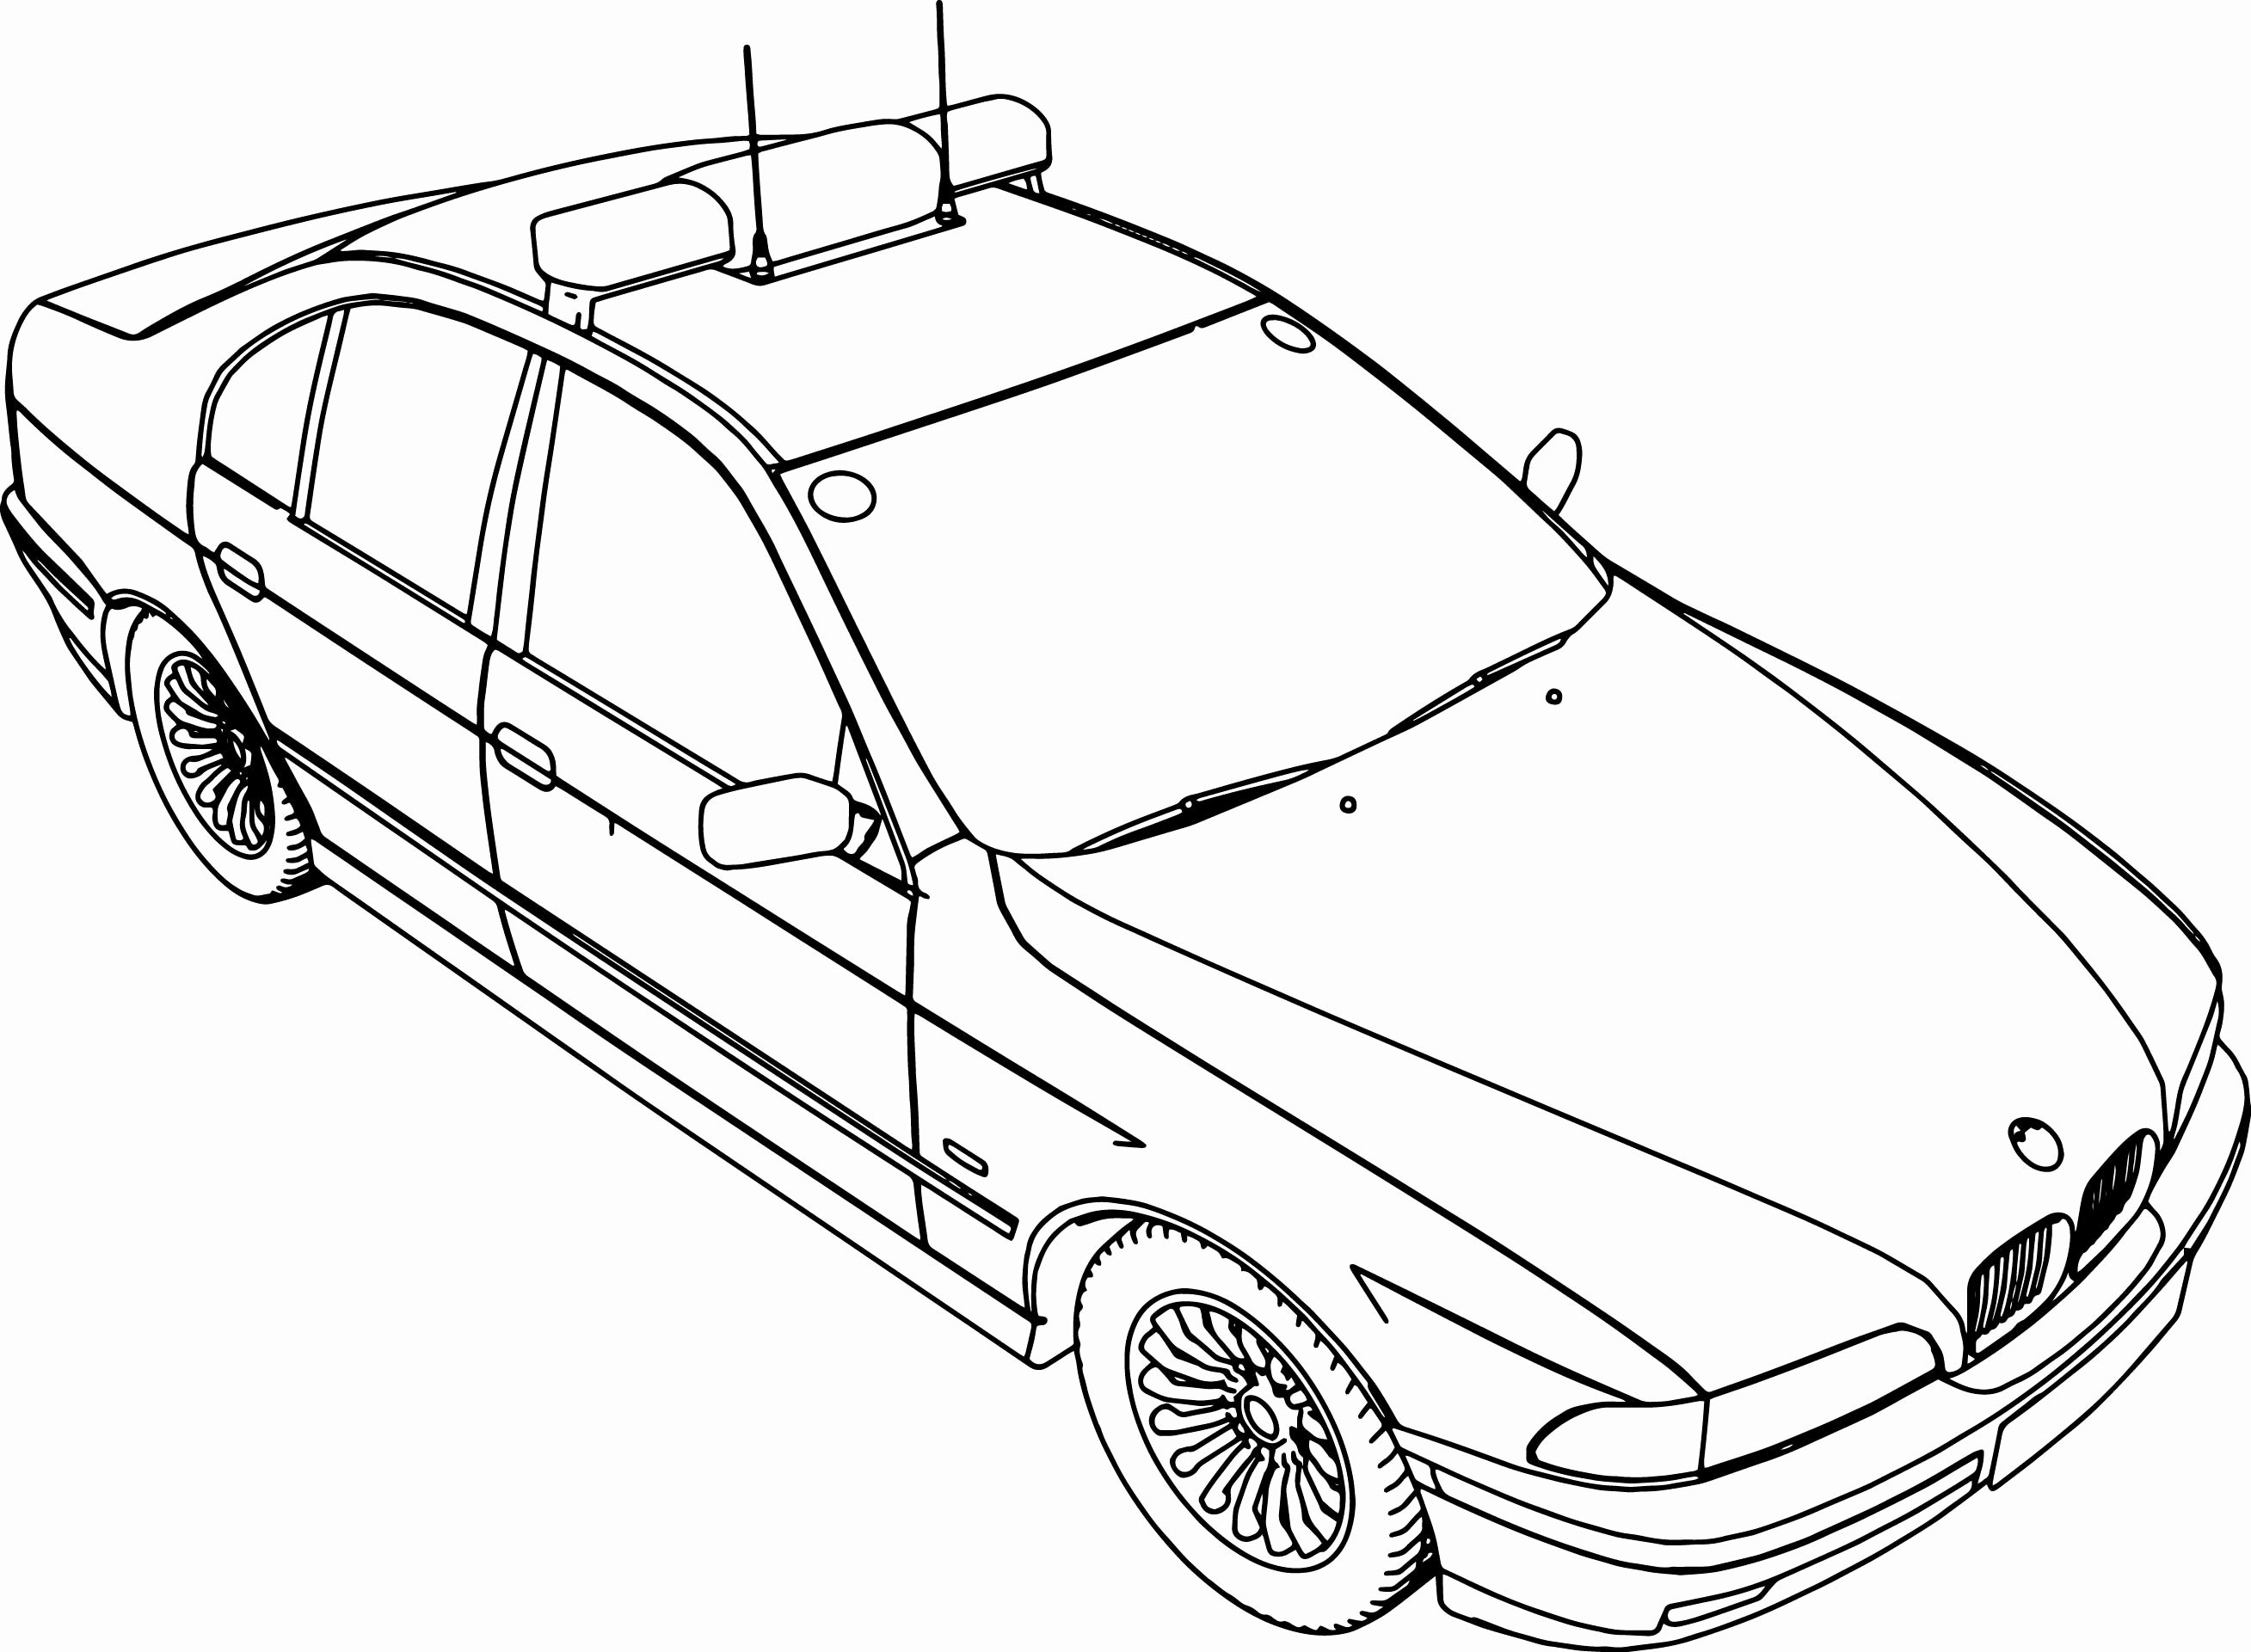 Bmw I8 Coloring Pages at GetColorings.com | Free printable colorings